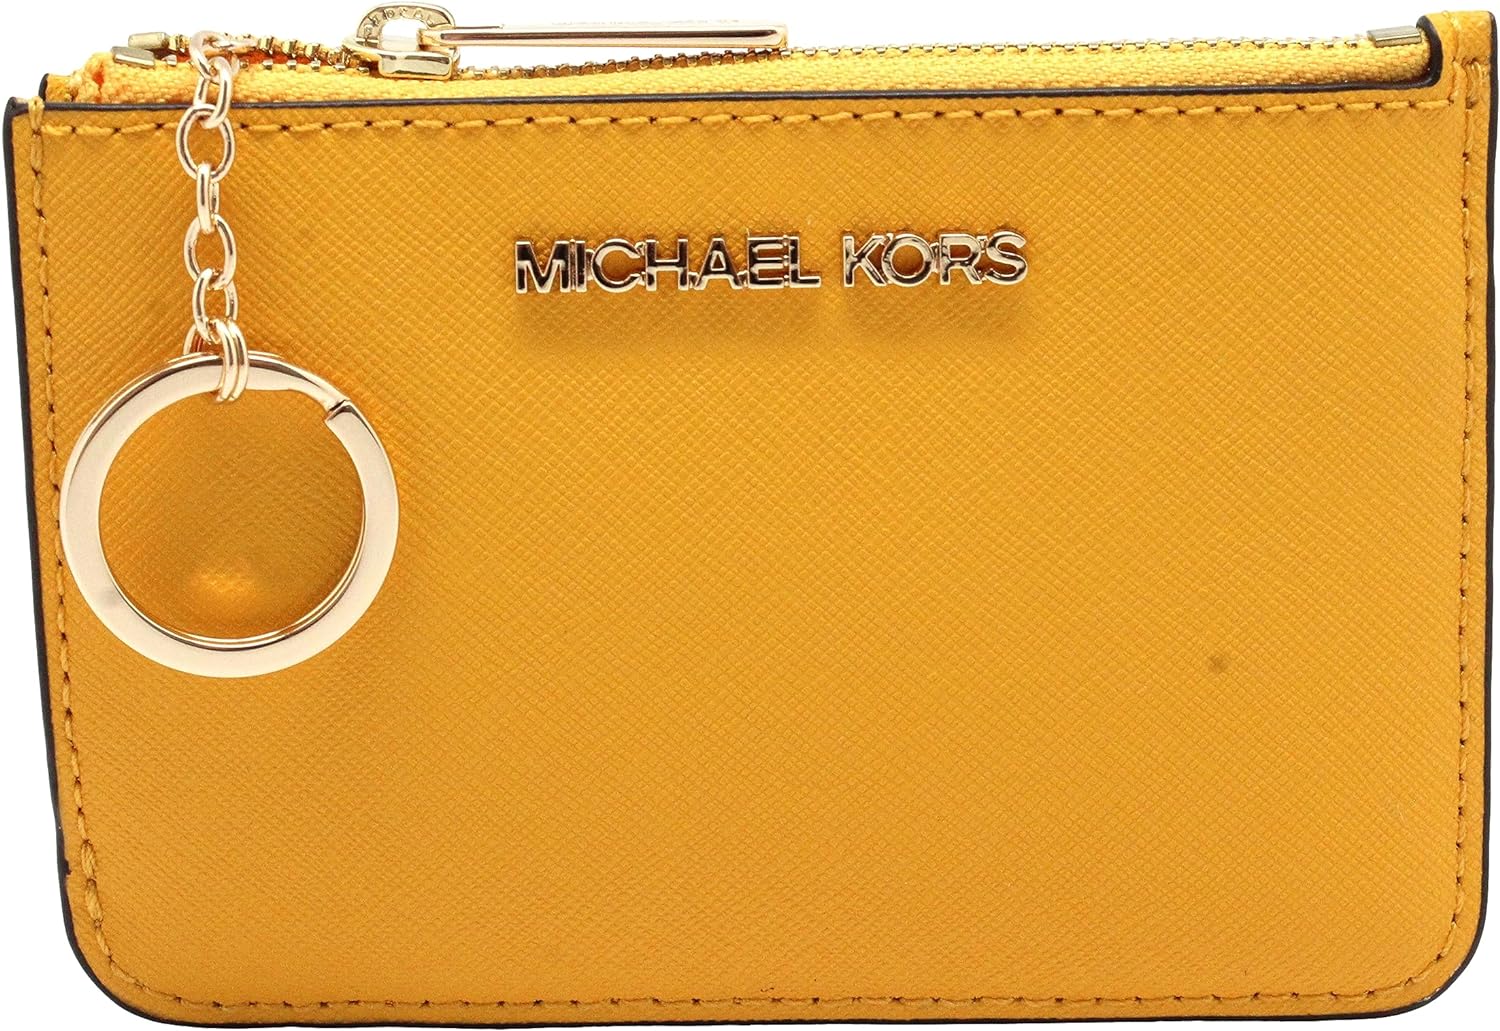 Michael Kors Jet Set Travel Small Top Zip Coin Pouch with ID Holder in Saffiano Leather (Jasmine Yellow, 1) - image 1 of 6